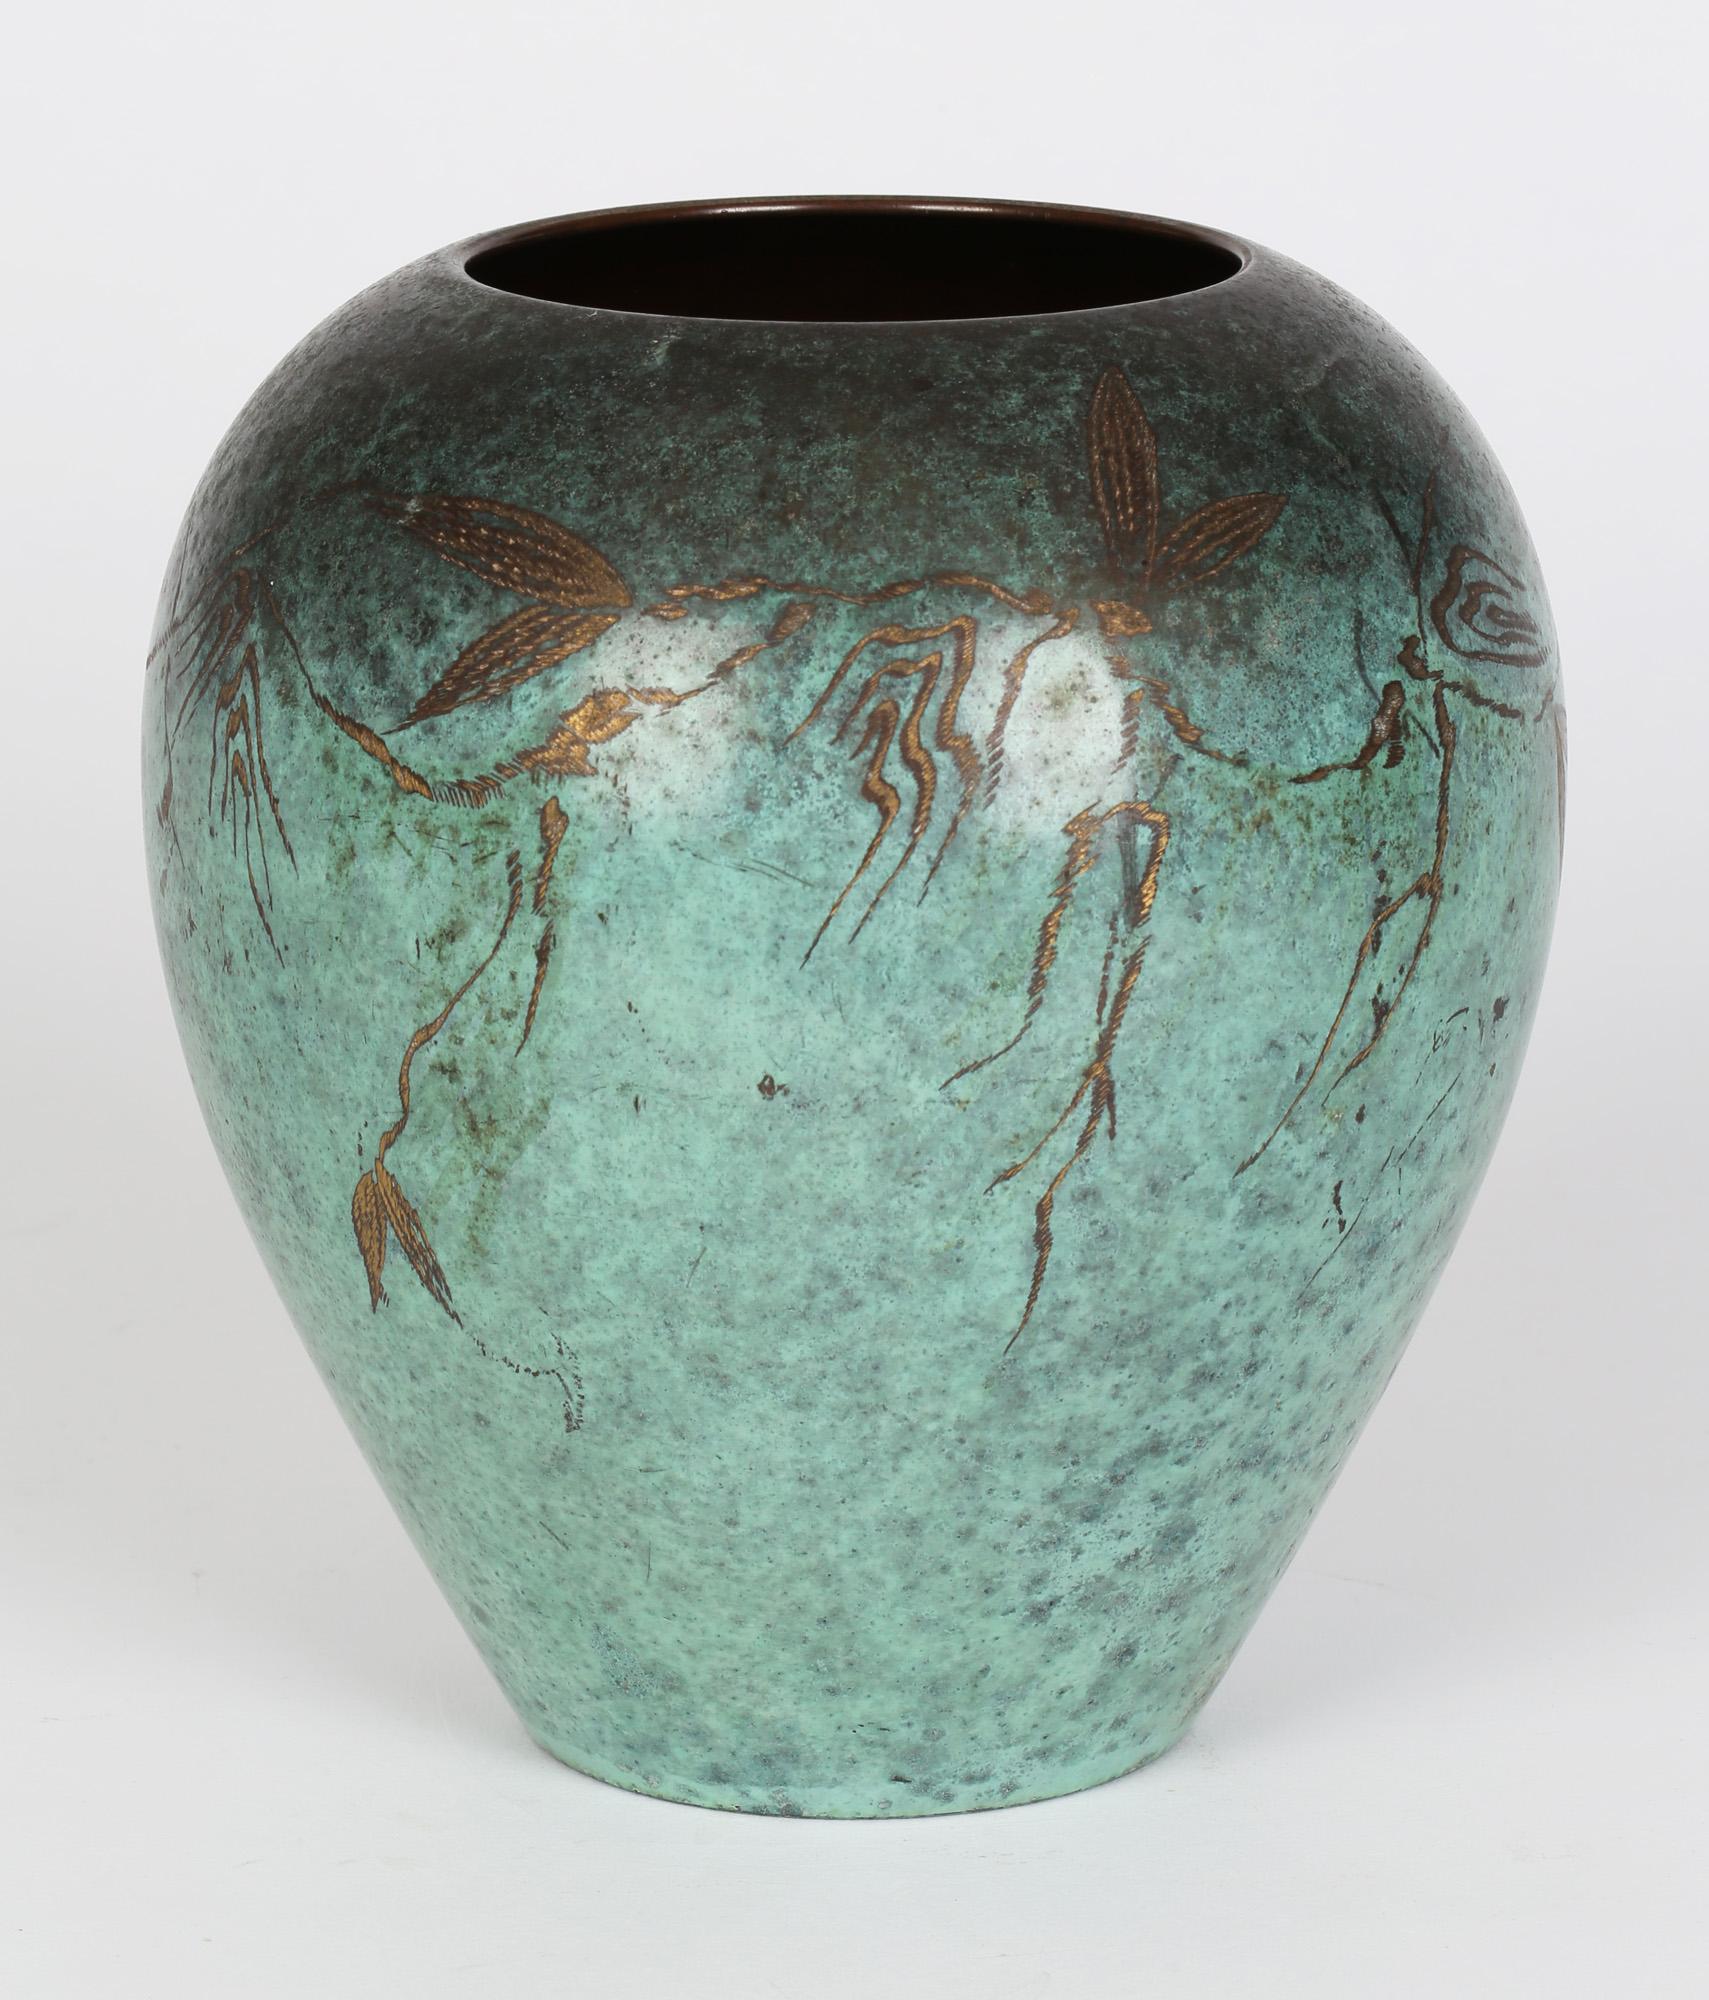 A fine WMF (Württembergische Metallwarenfabrik) patinated bronze Ikora vase decorated with a stylized trailing leaf designs by Paul Haustein (1880-1944) and dating from around 1920. This rounded bulbous shaped vase stands on a narrow rounded foot